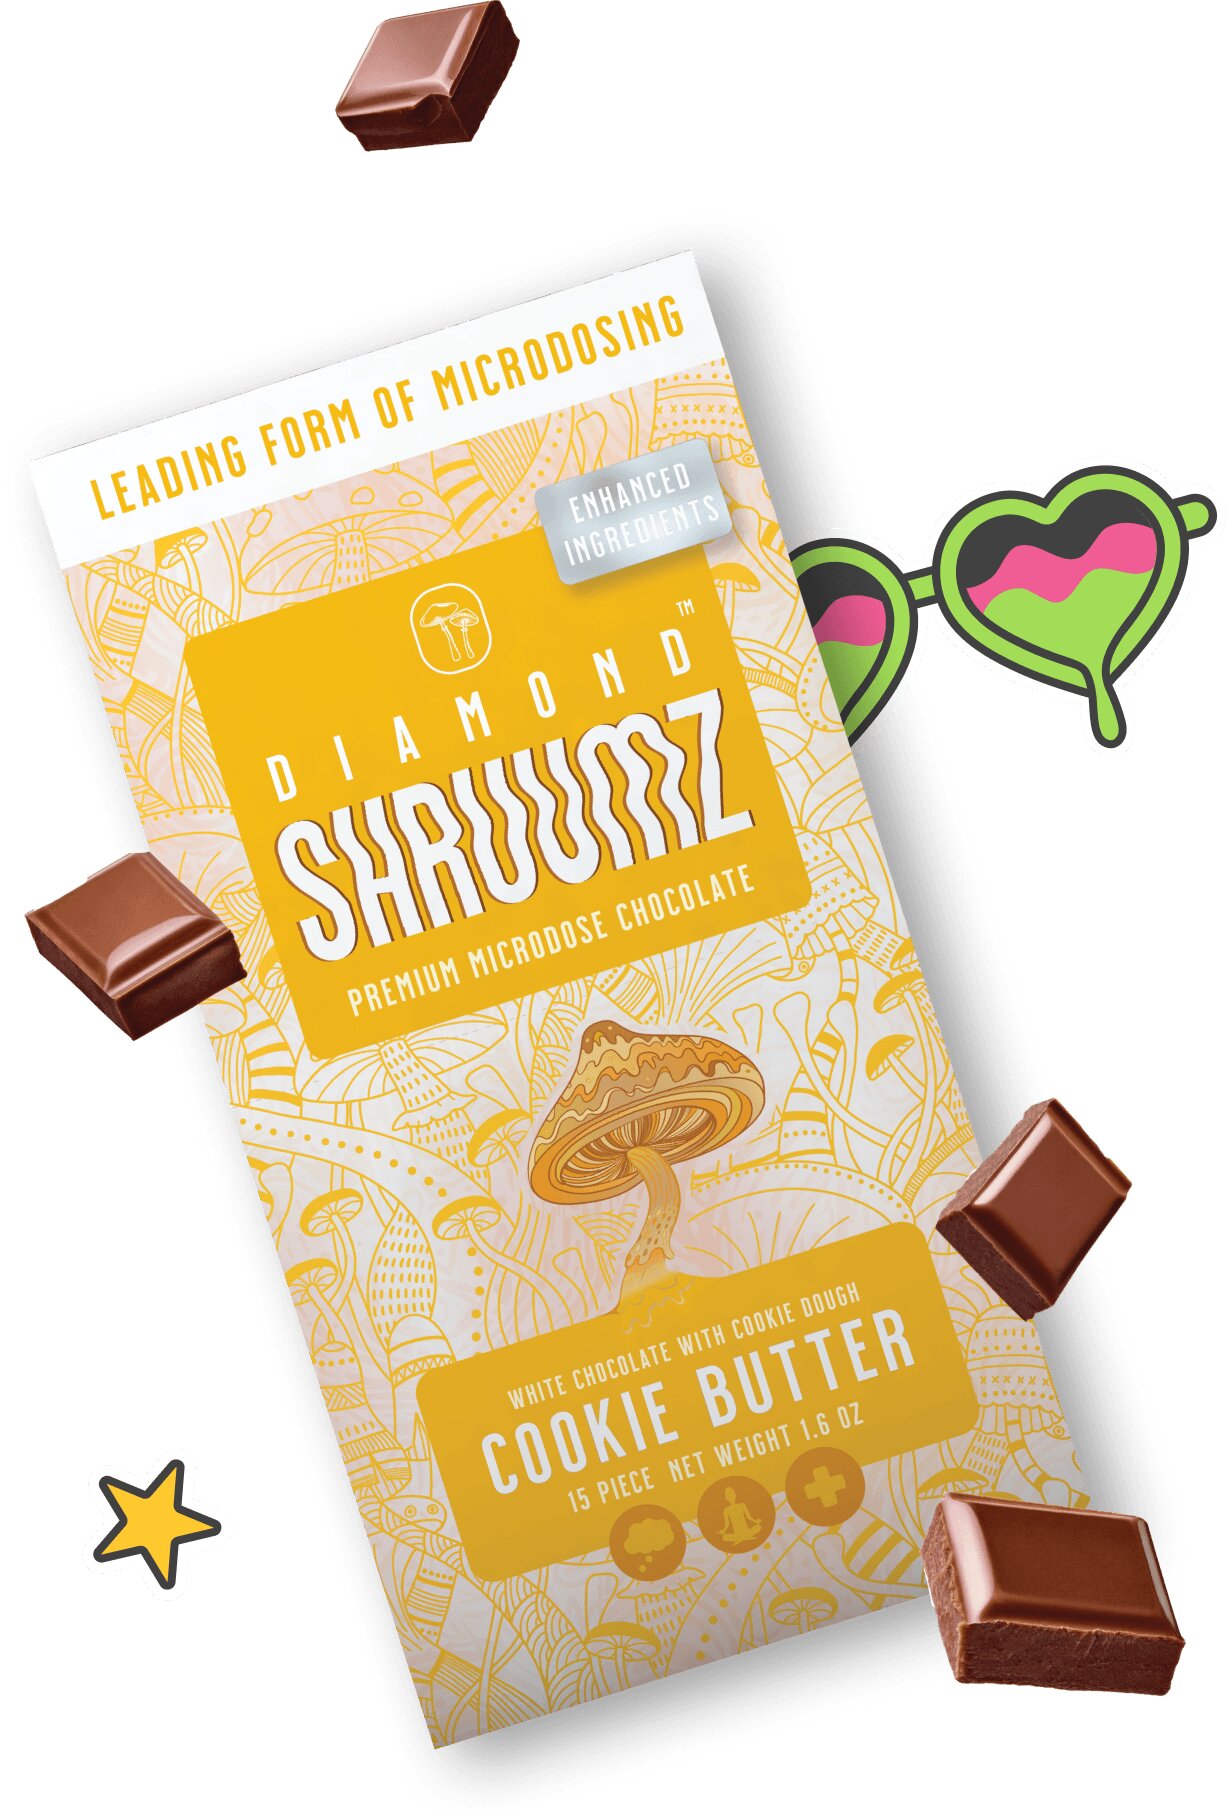 Why Should You Try Shruumz Chocolate Bars?